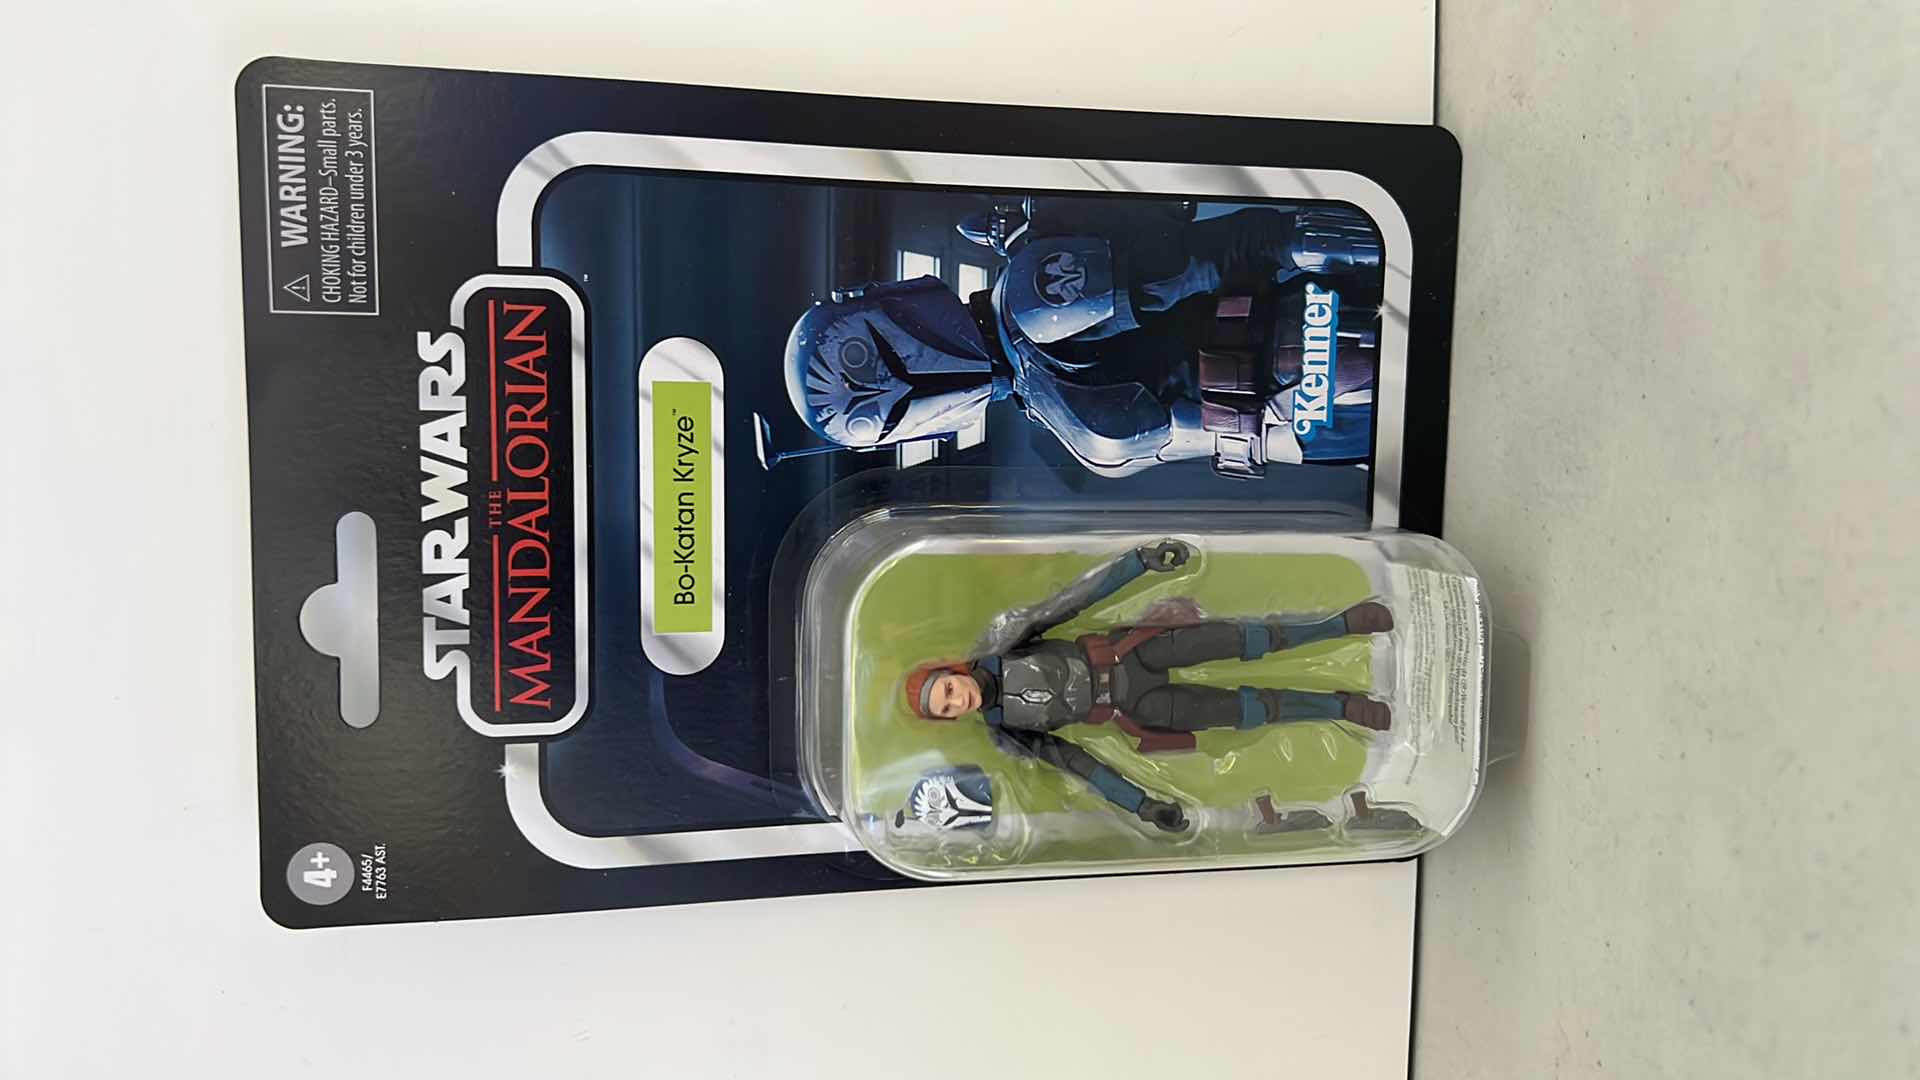 Photo 3 of 3-BRAND NEW STAR WARS ACTION FIGURES $45